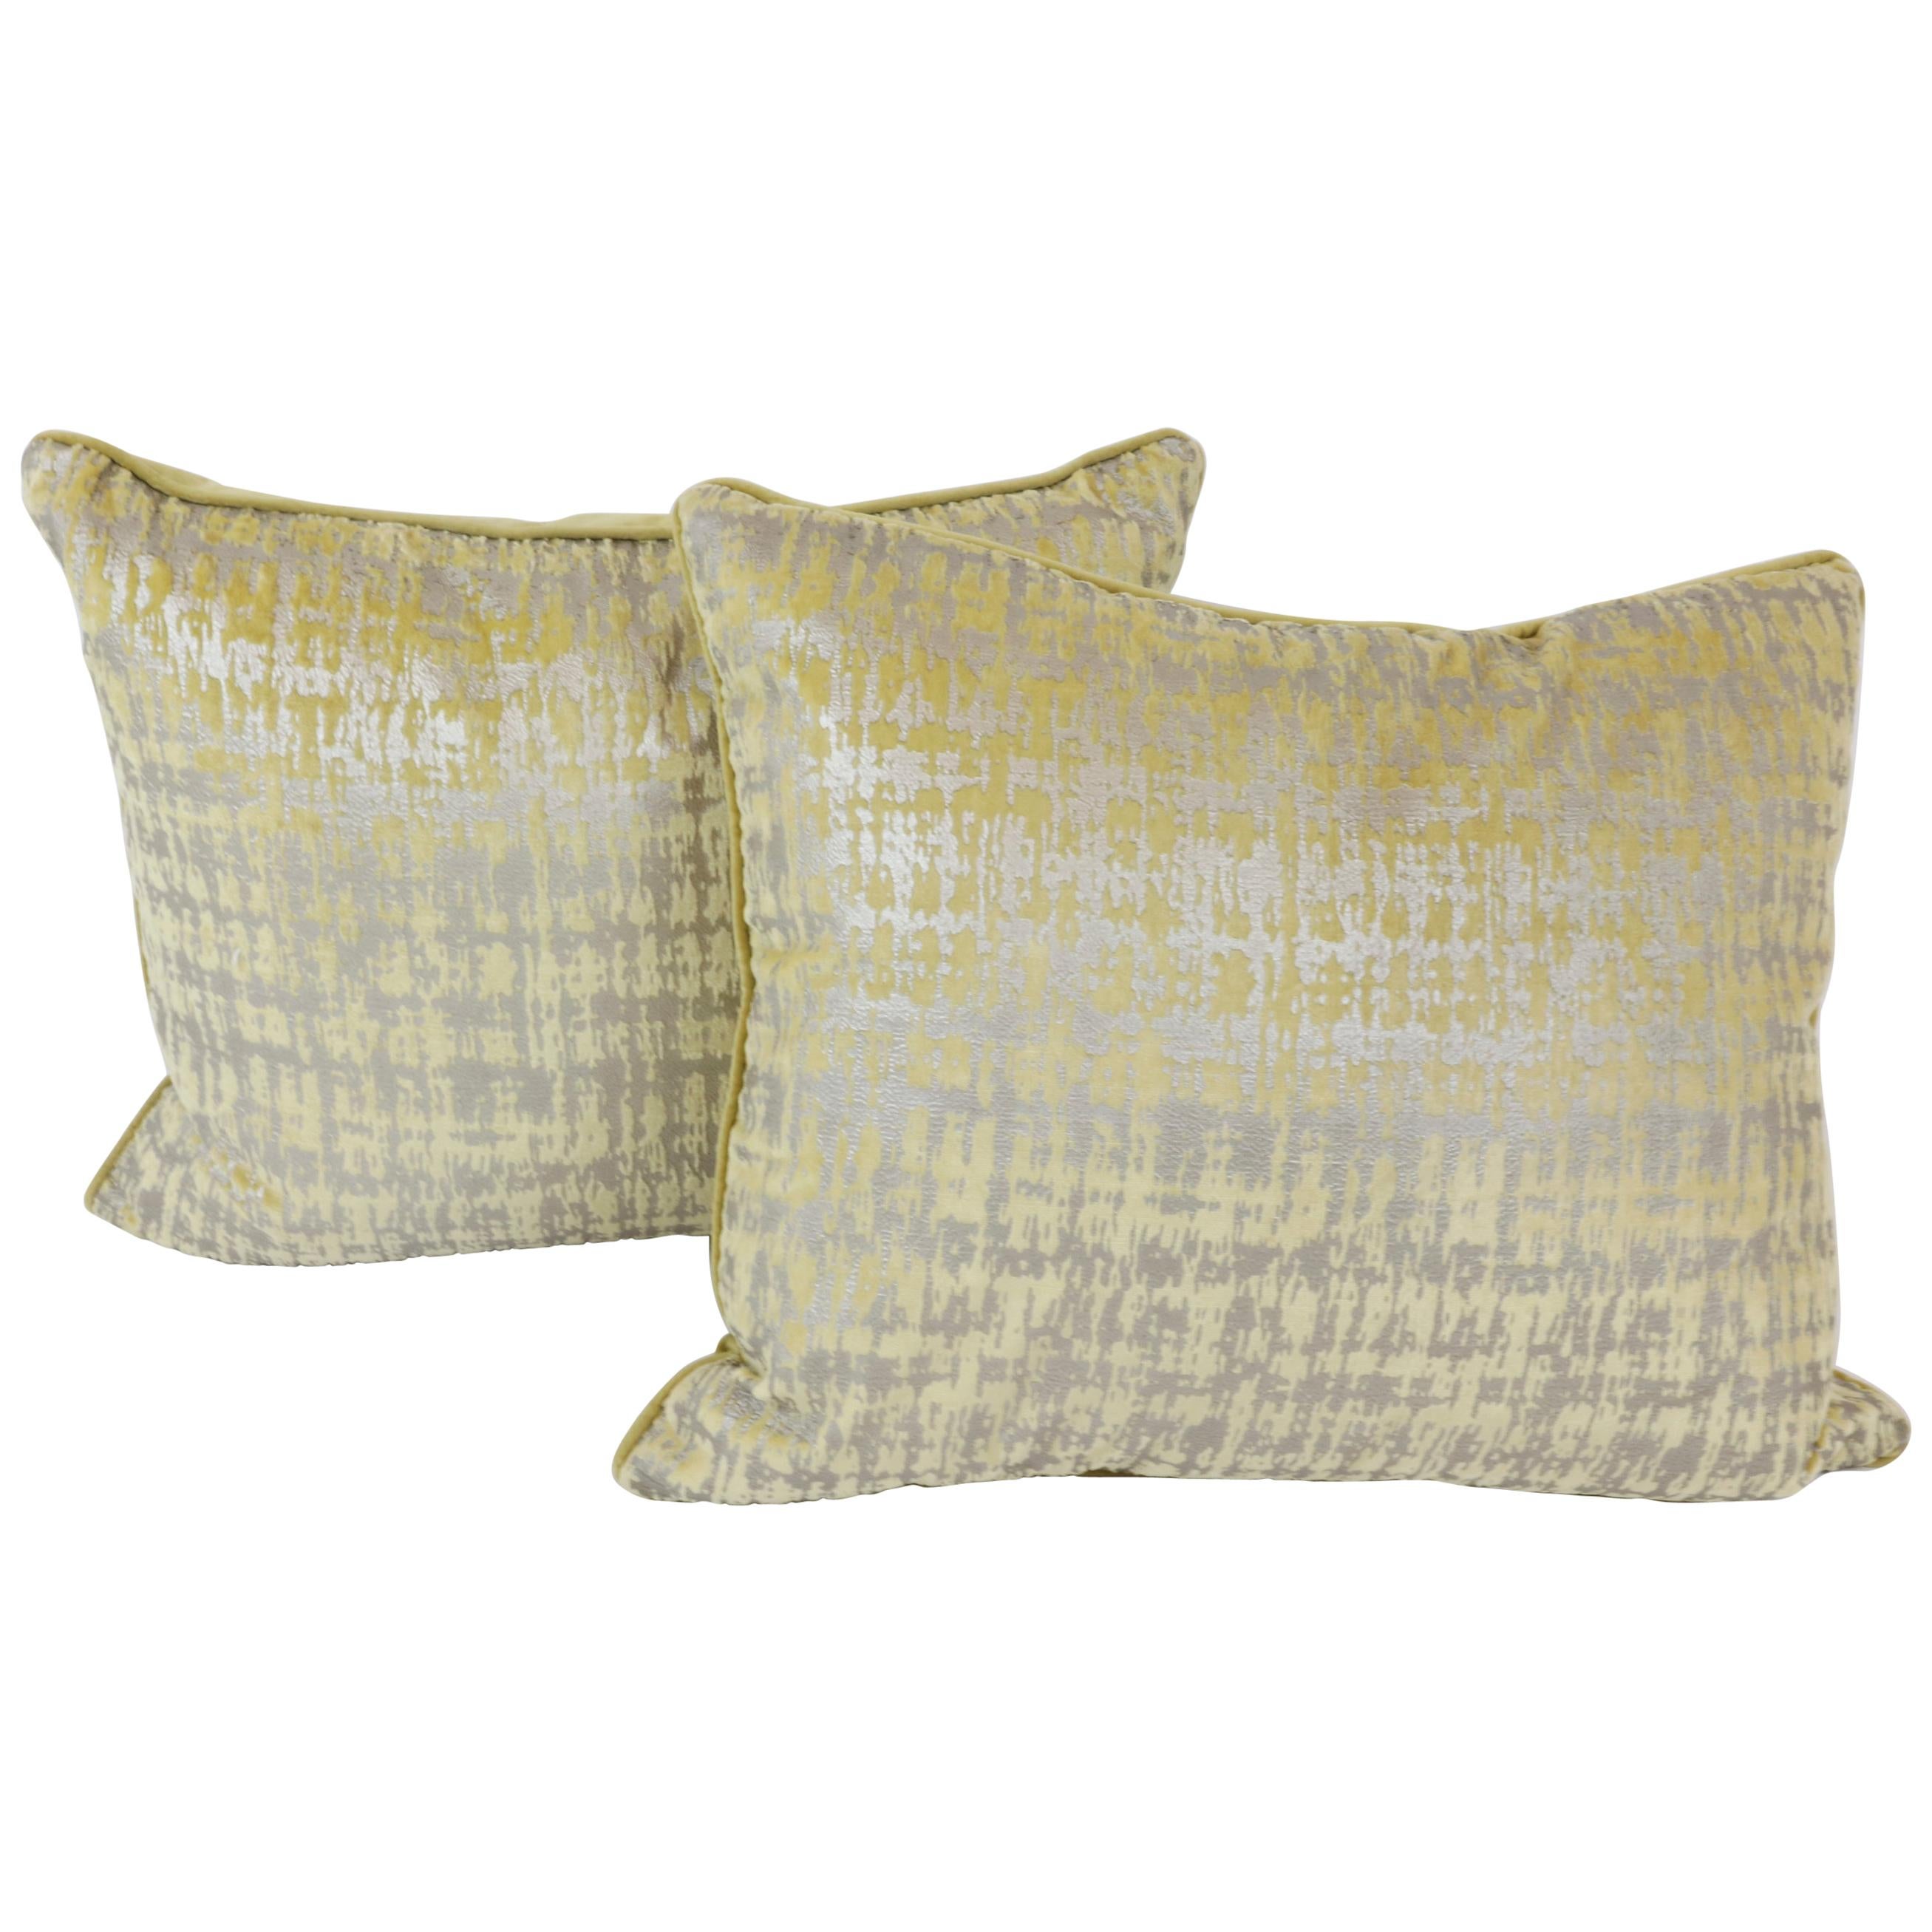 Pair of Gold and Silver Pillows